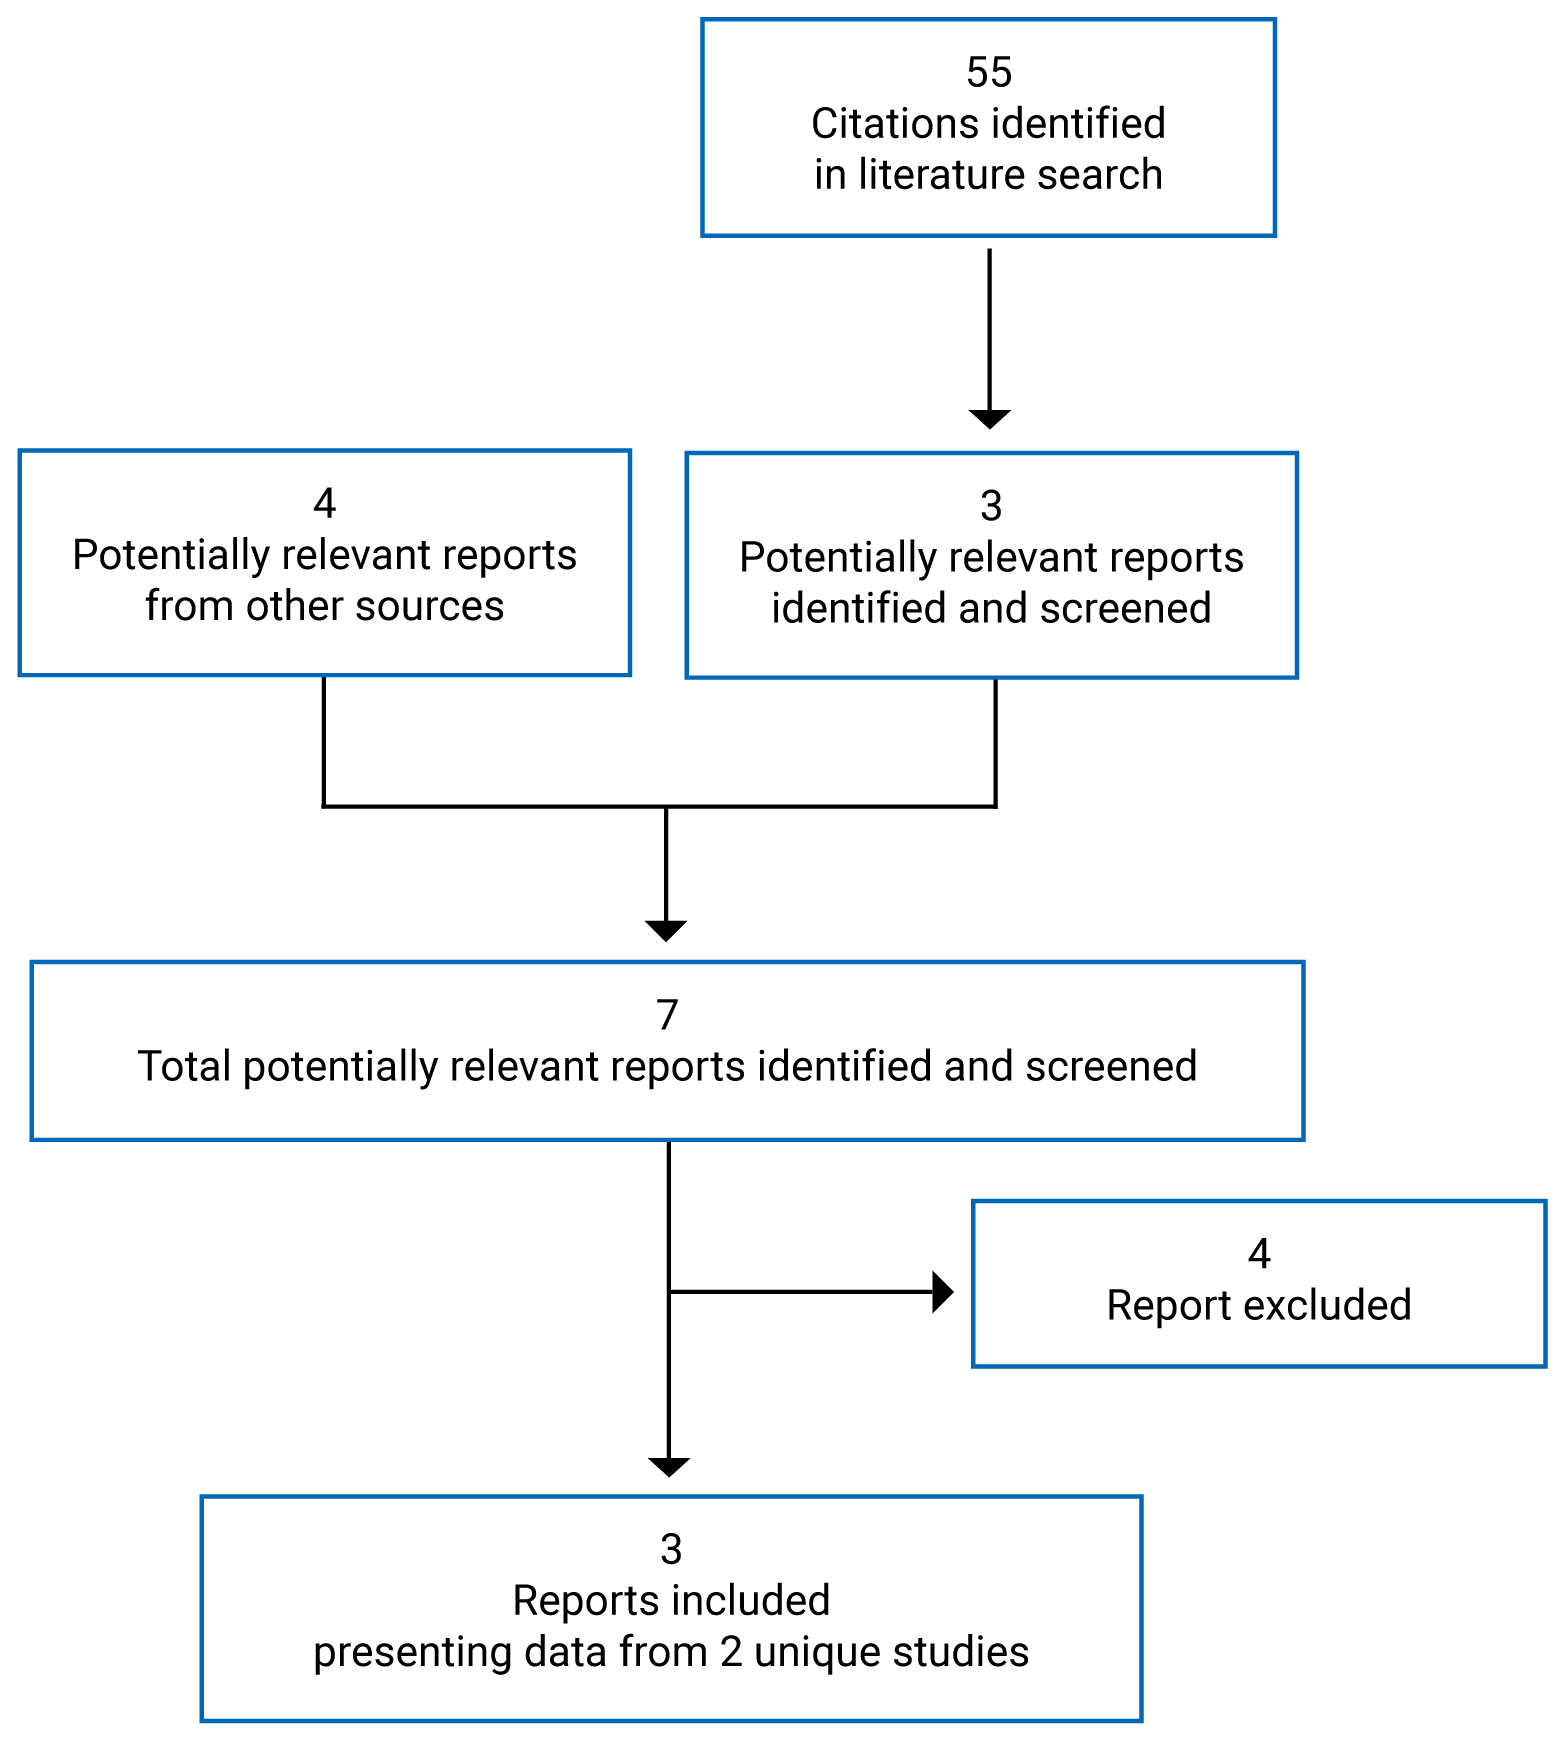 55 citations were identified in the literature search, of which 3 were potentially relevant. Four additional reports from the grey literature were potentially relevant. After full-text reports were reviewed, 3 reports representing 2 unique studies were included in the systematic review section.